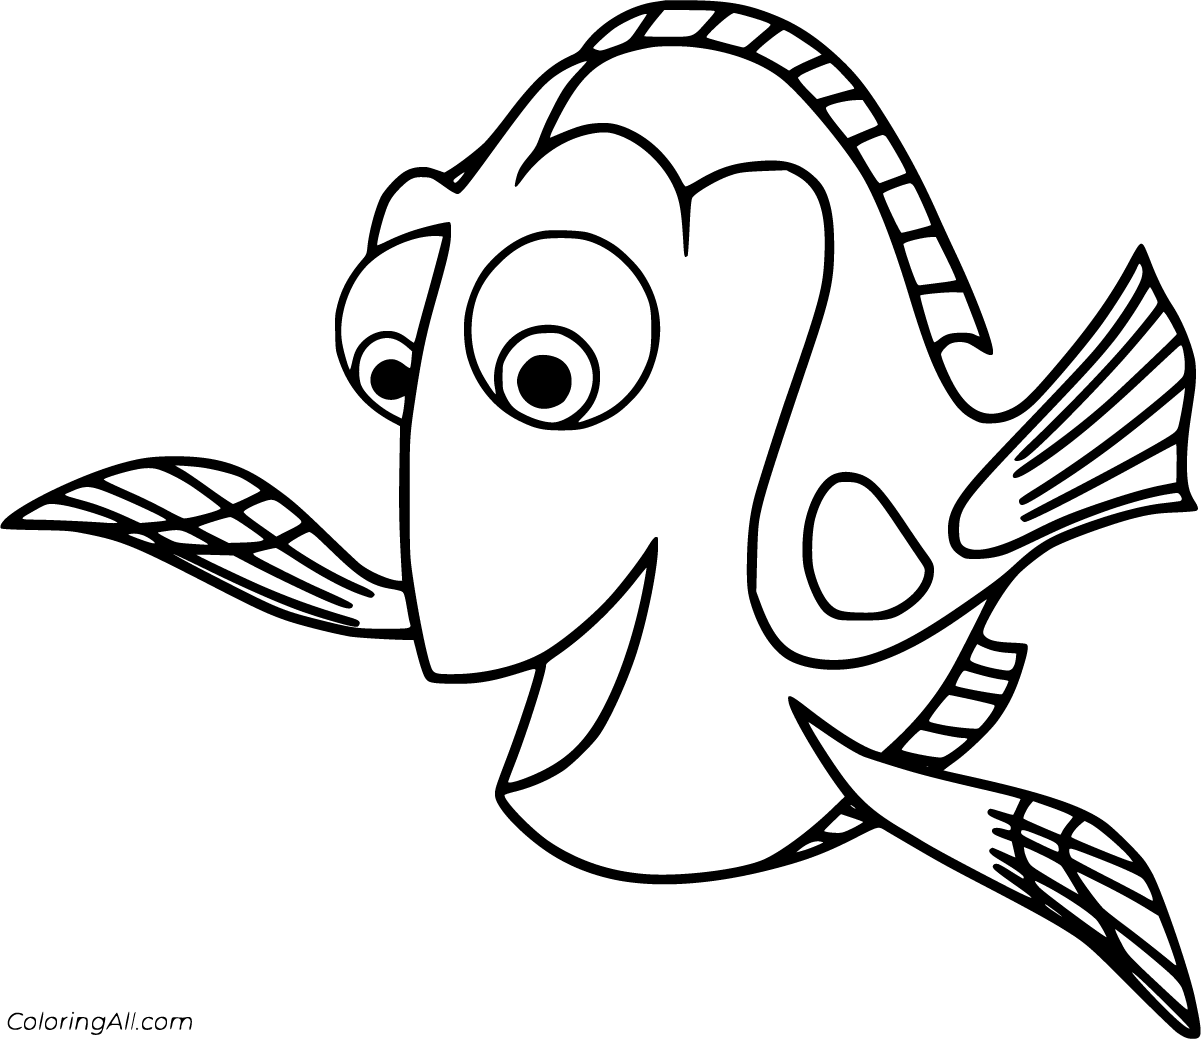 Finding Dory Coloring Pages - ColoringAll